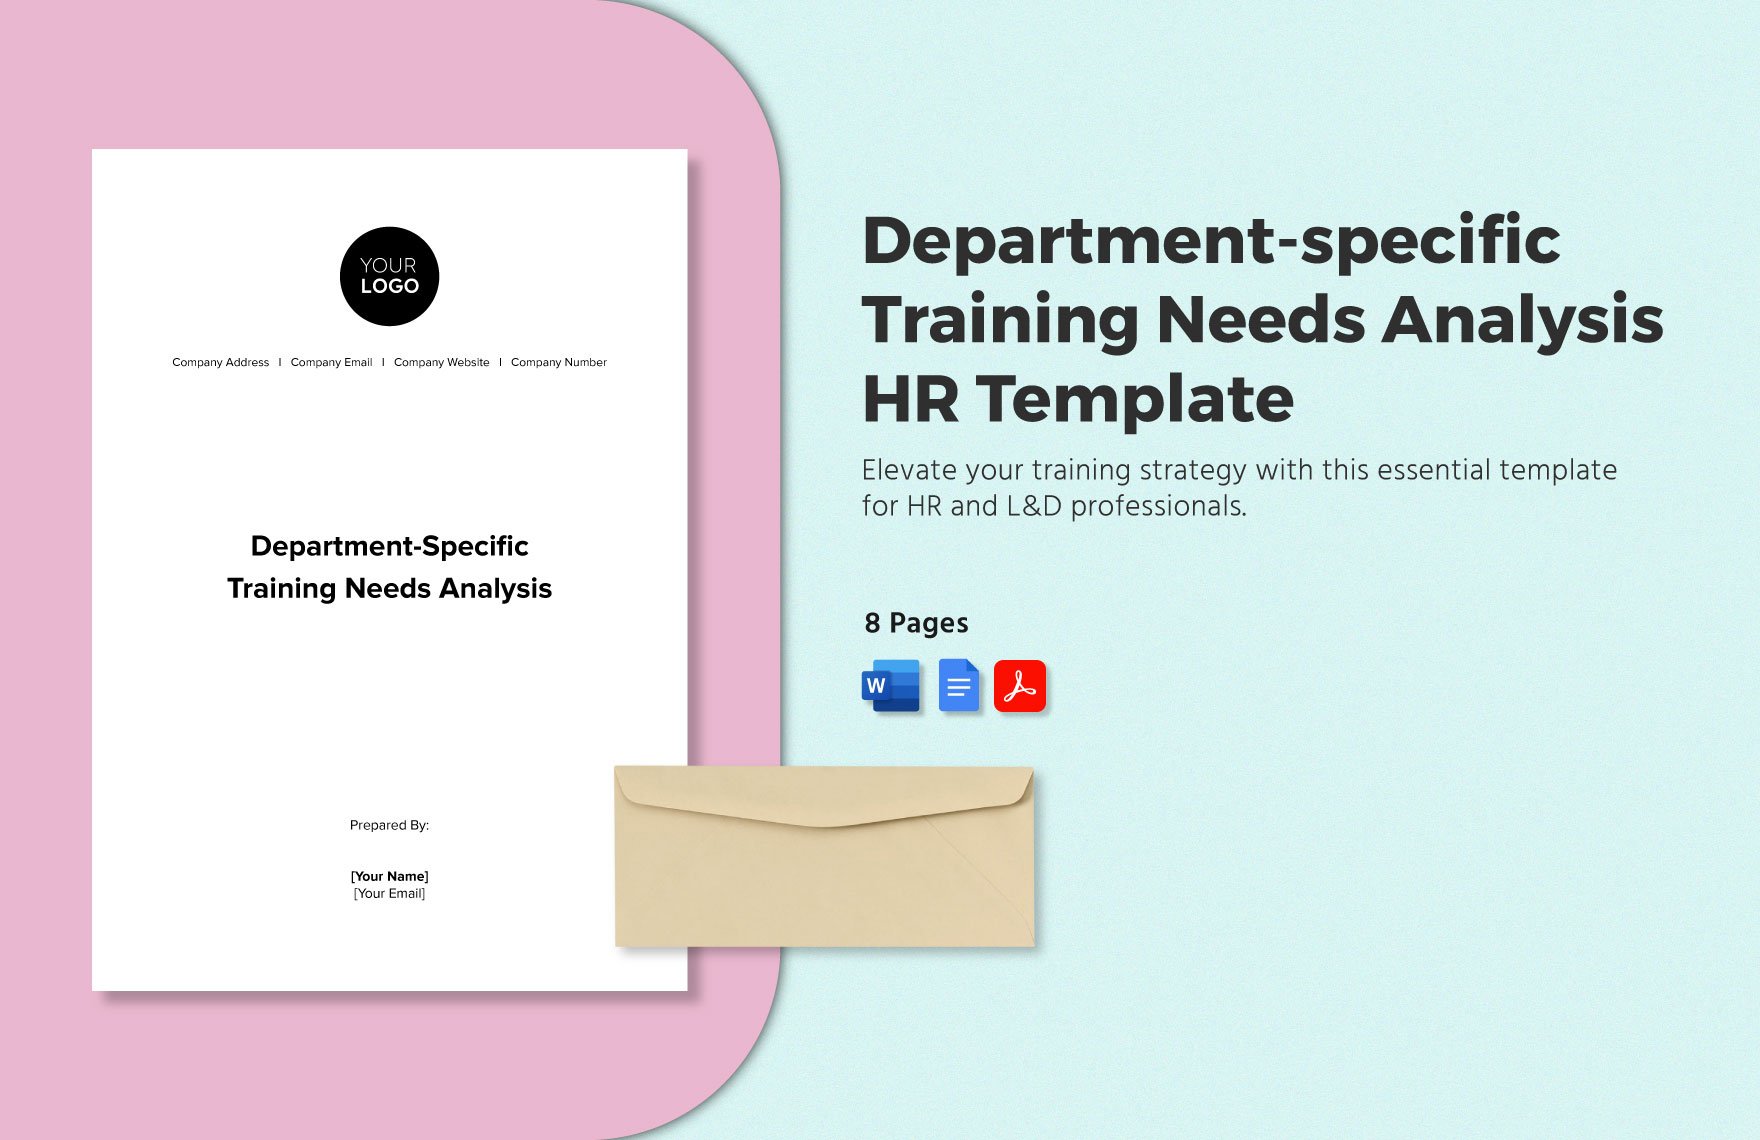 Department-specific Training Needs Analysis HR Template